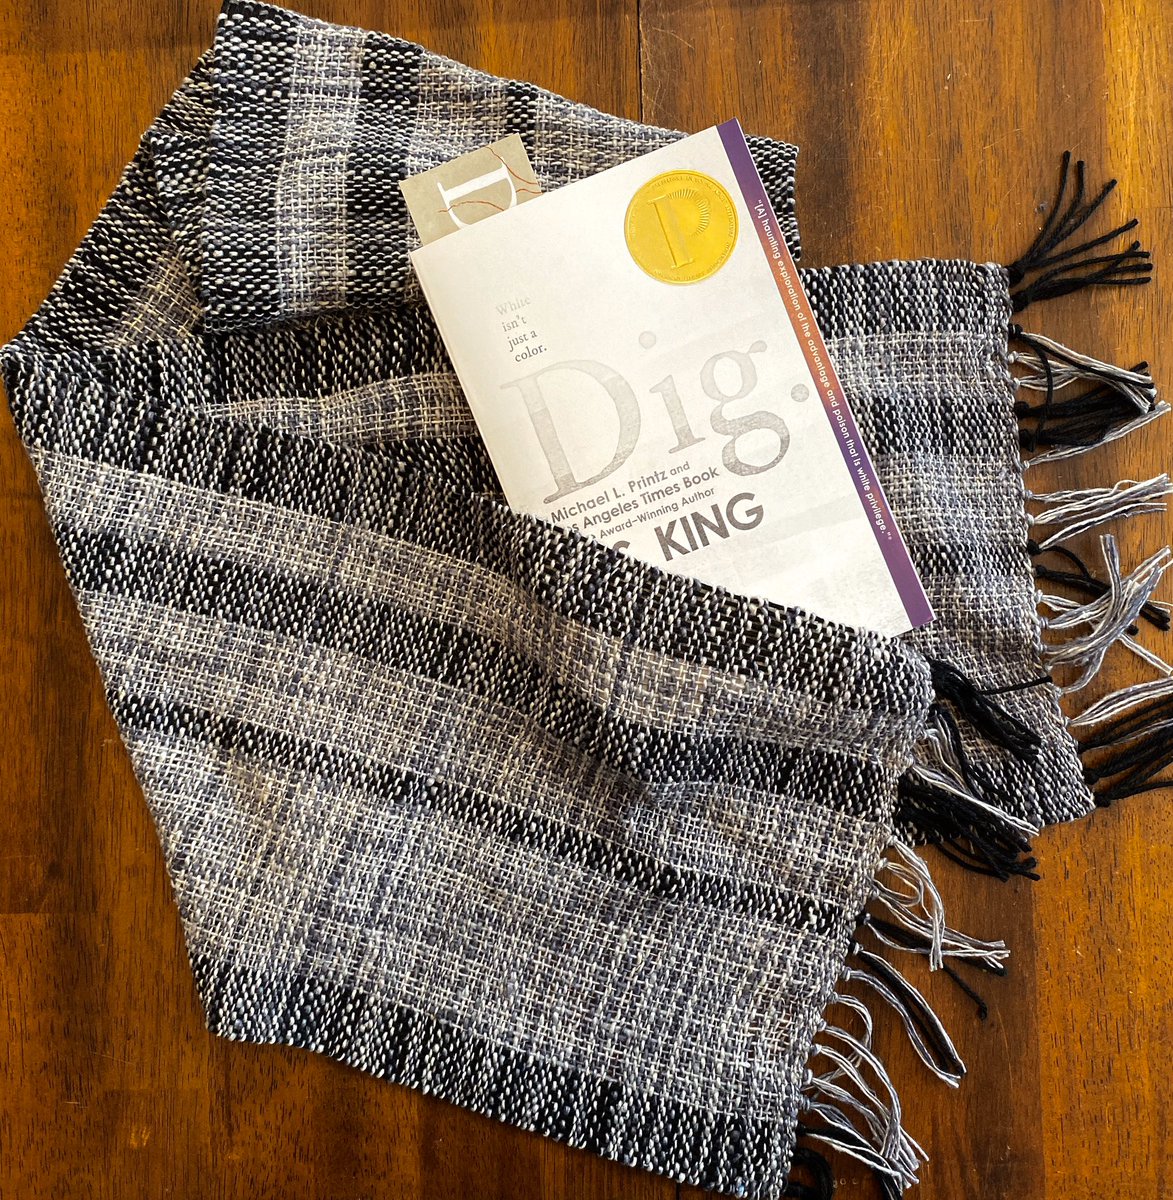 Scarf: silk, 60”x 9.5”, black and variegated gray/natural. Book: paperback, gold sticker on it, signed. Bid now—see my last tweet for how!)  #VoteRidersAuction  @3toVote